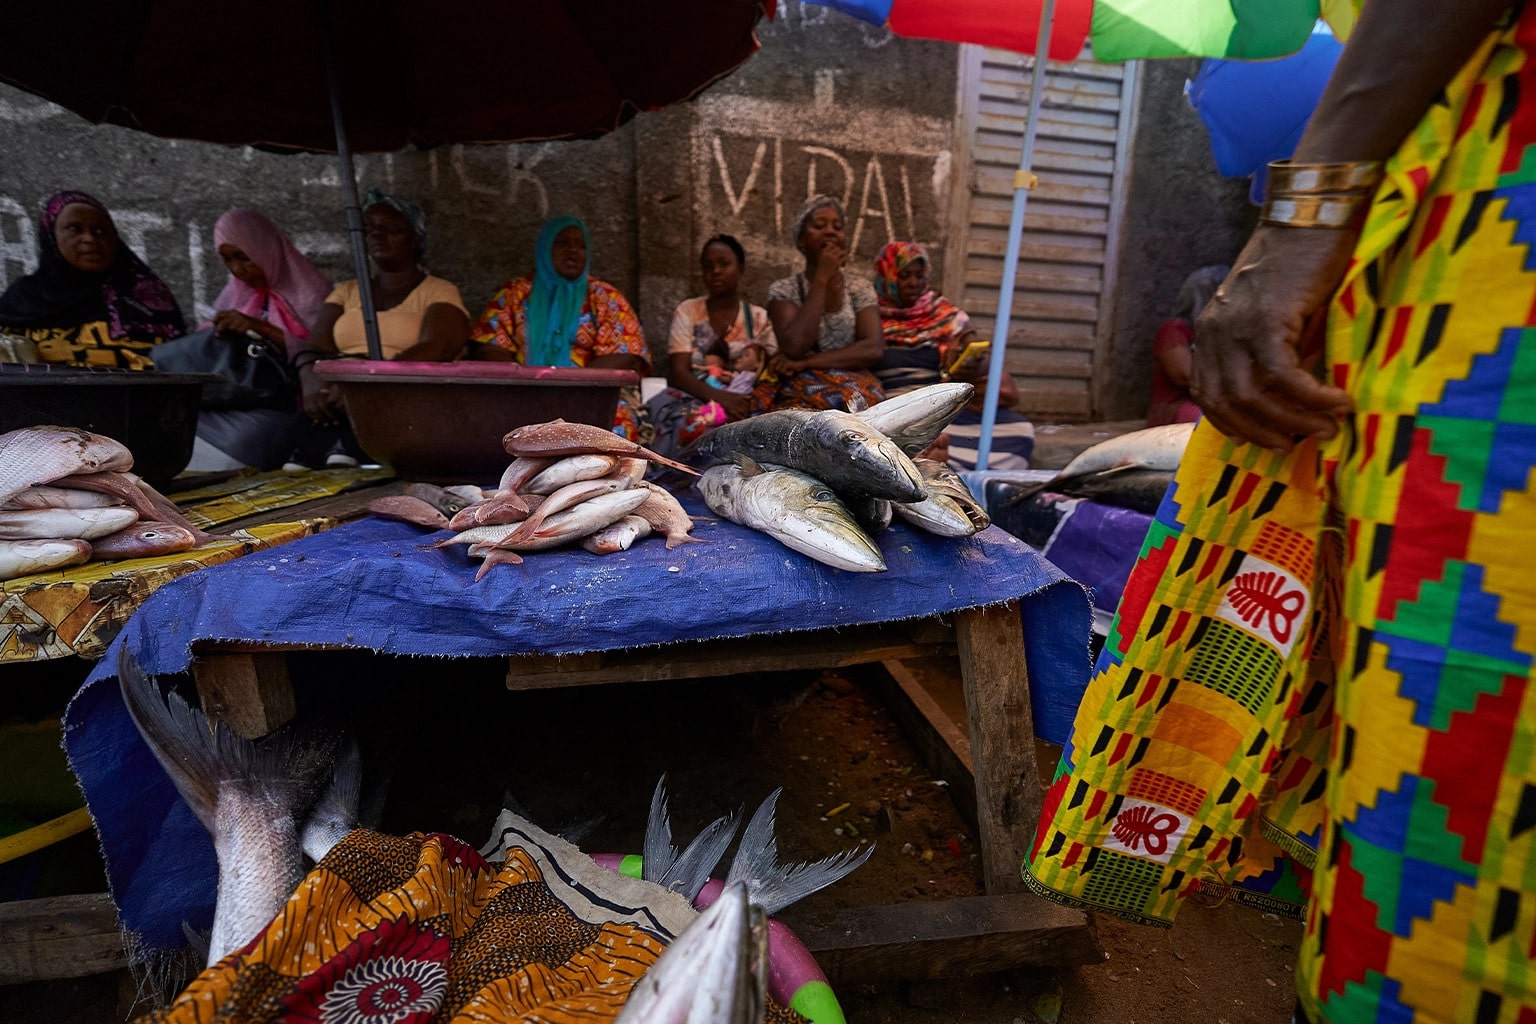 Barracuda and snapper on offer at a stall near Goderich wharf near Freetown. Fishers say they’ve had to go further out to sea for a good catch in recent years. Image by Ashoka Mukpo/Mongabay.